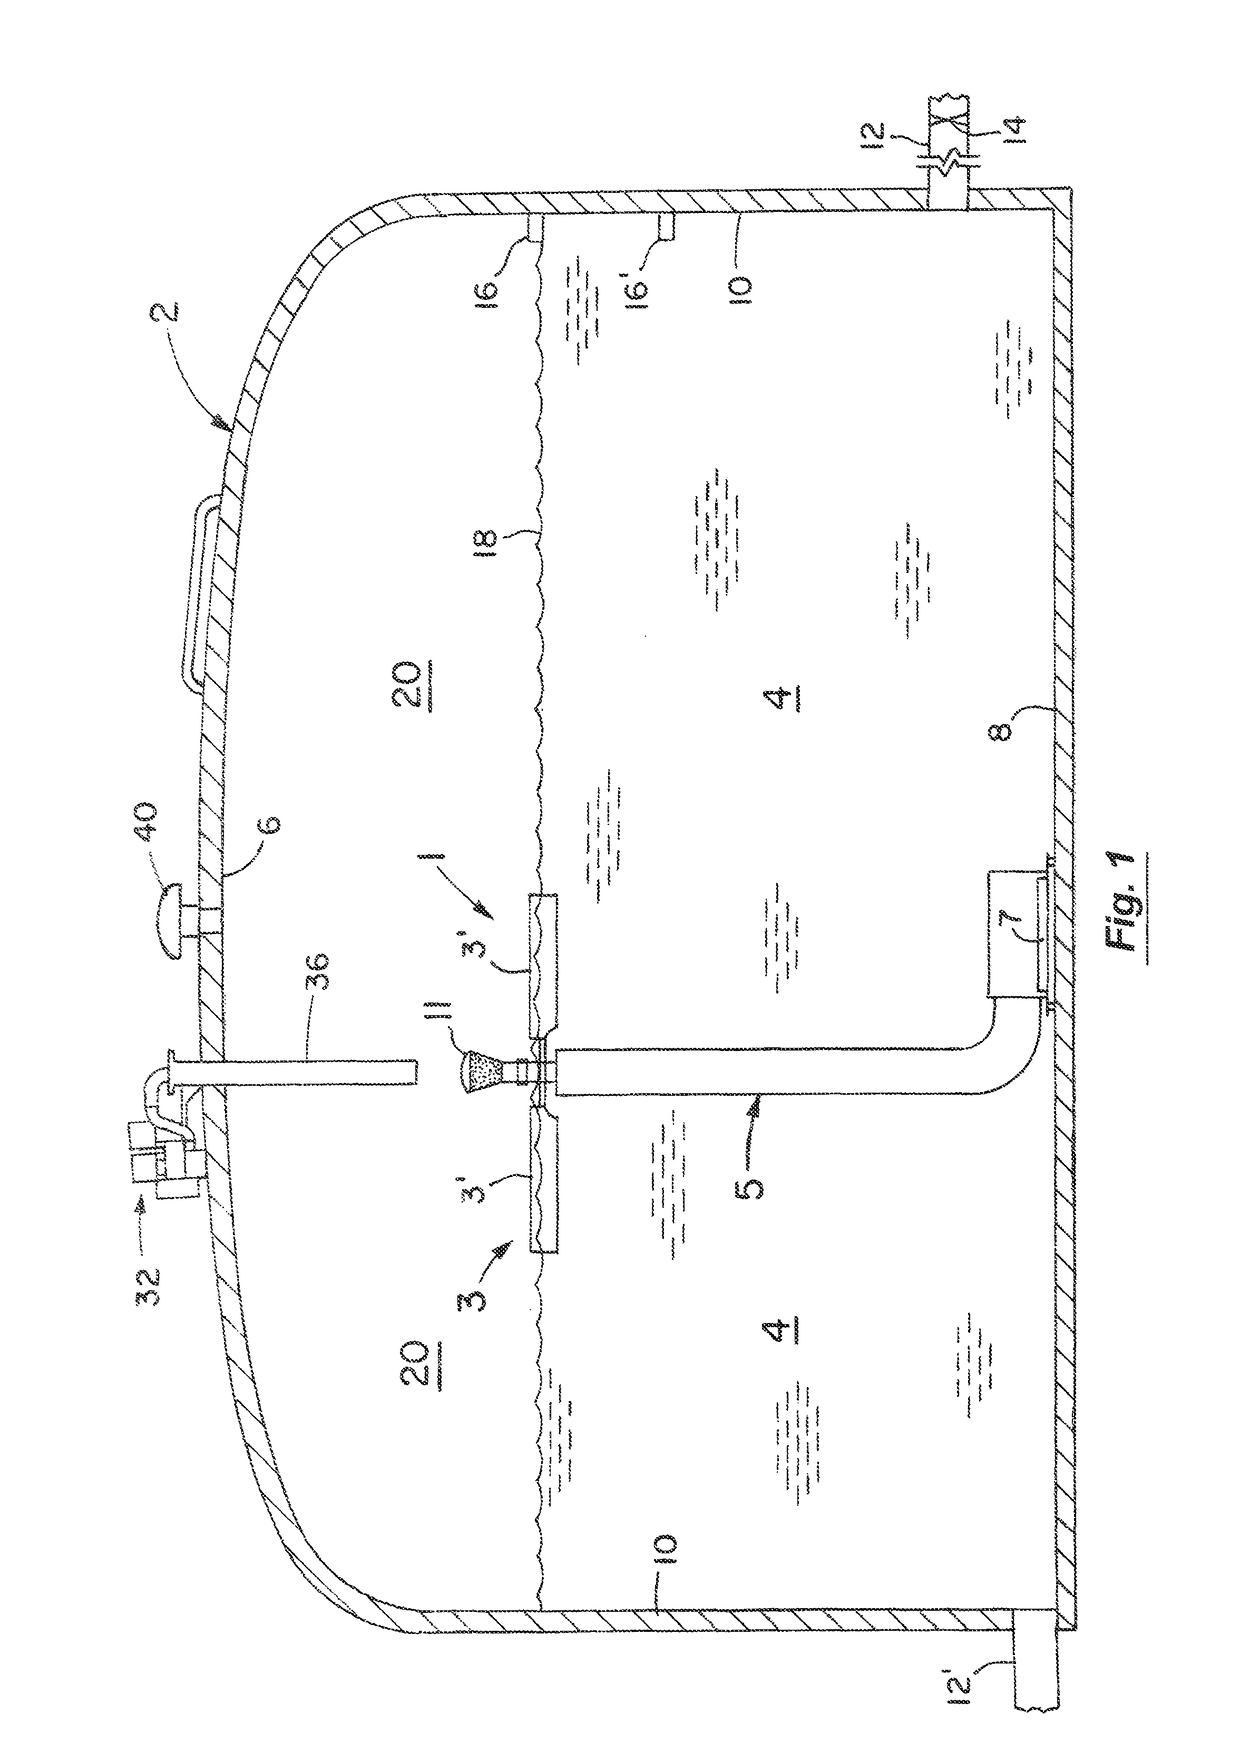 Method and apparatus for treating potable water in municipal and similar water tanks